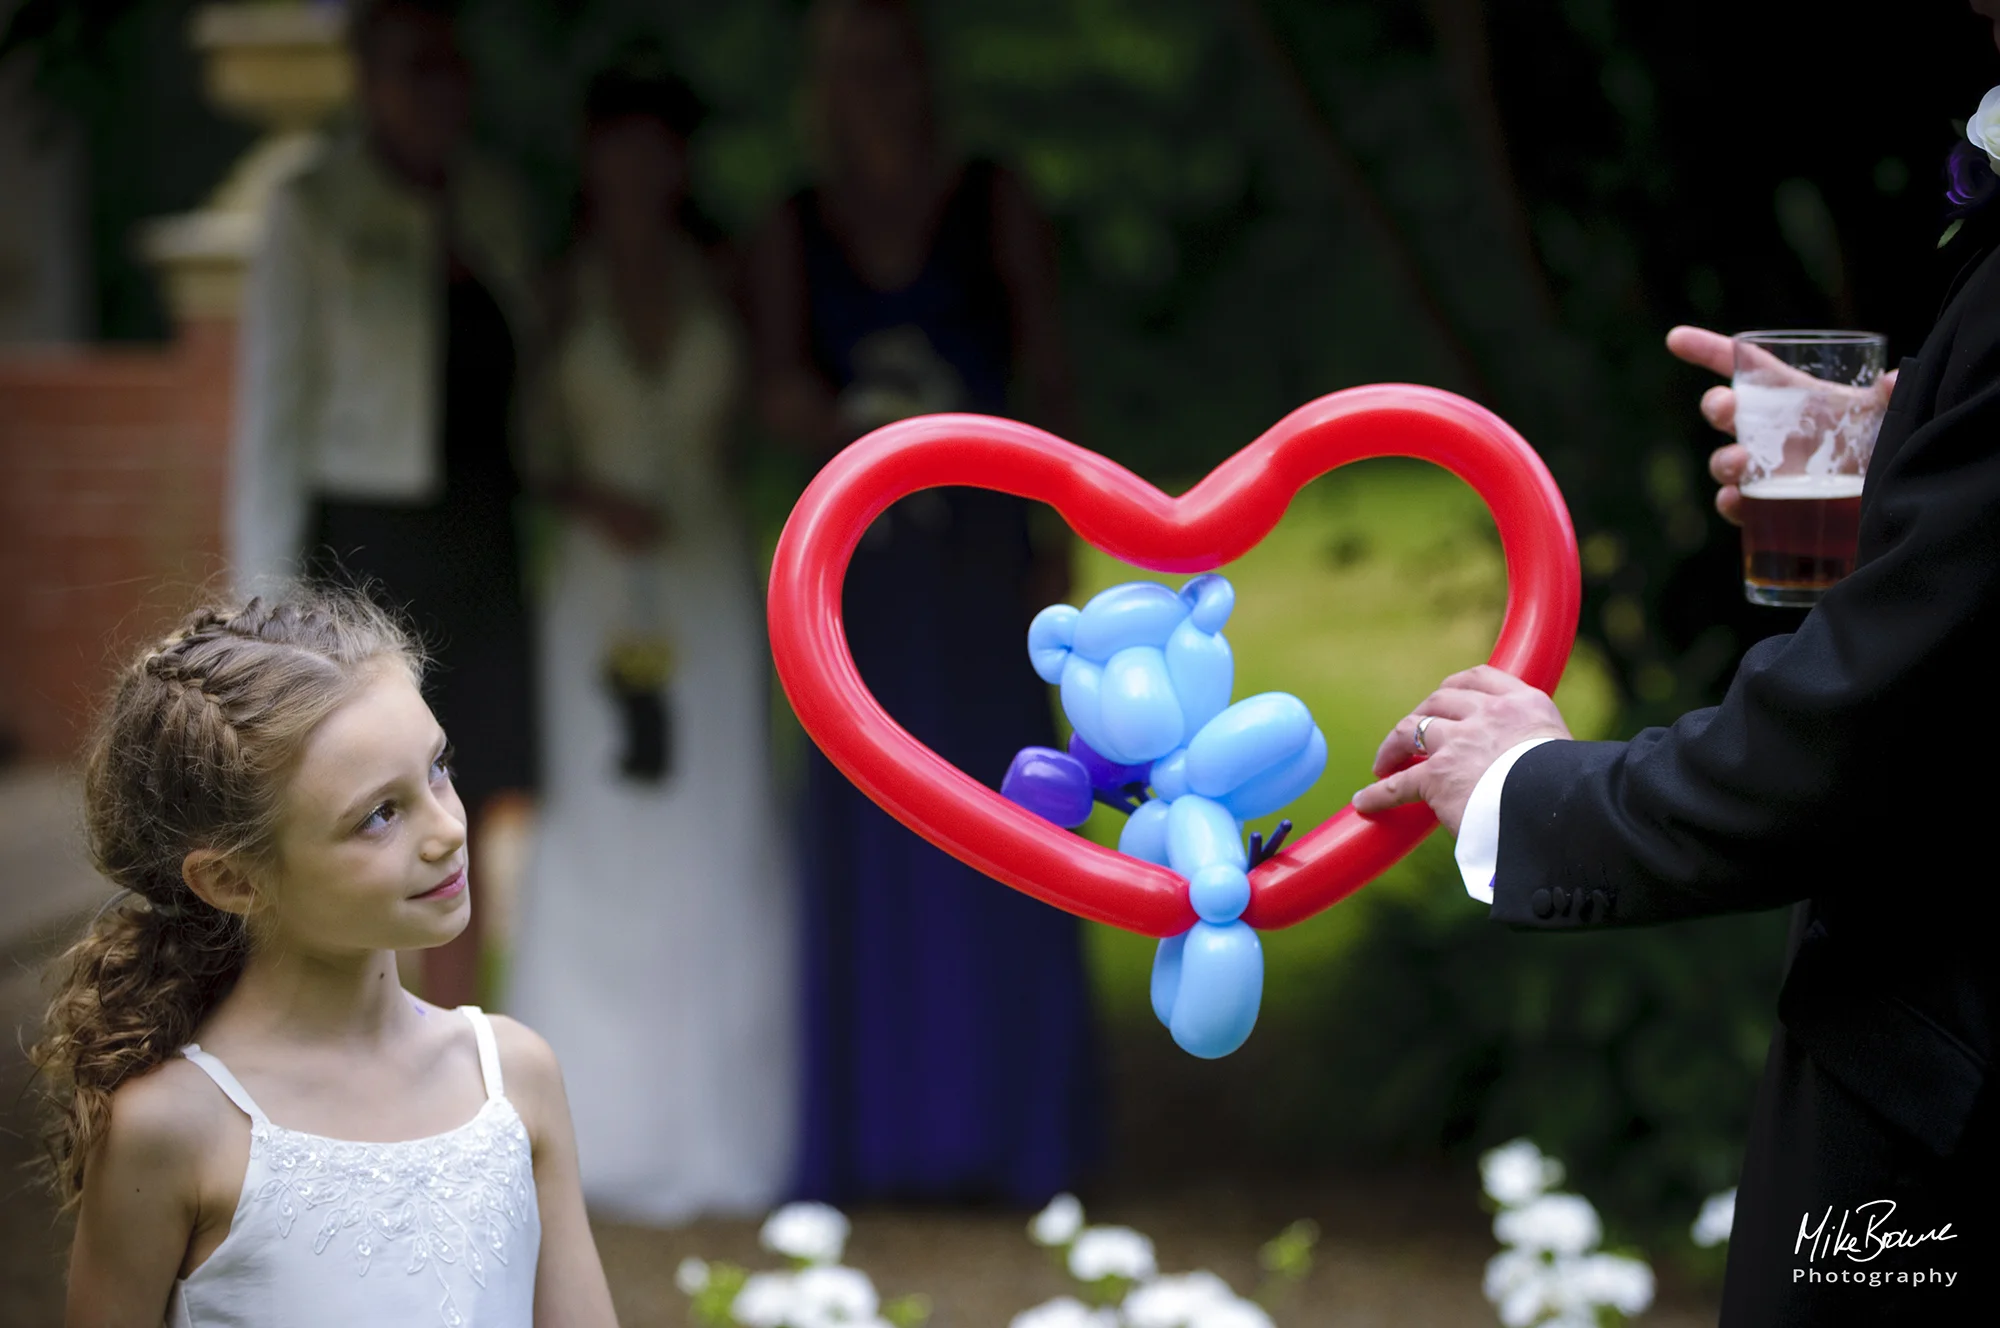 A young bridesmaid gazes quizzically at a balloon model of a blue teddy bear sitting in a red heart